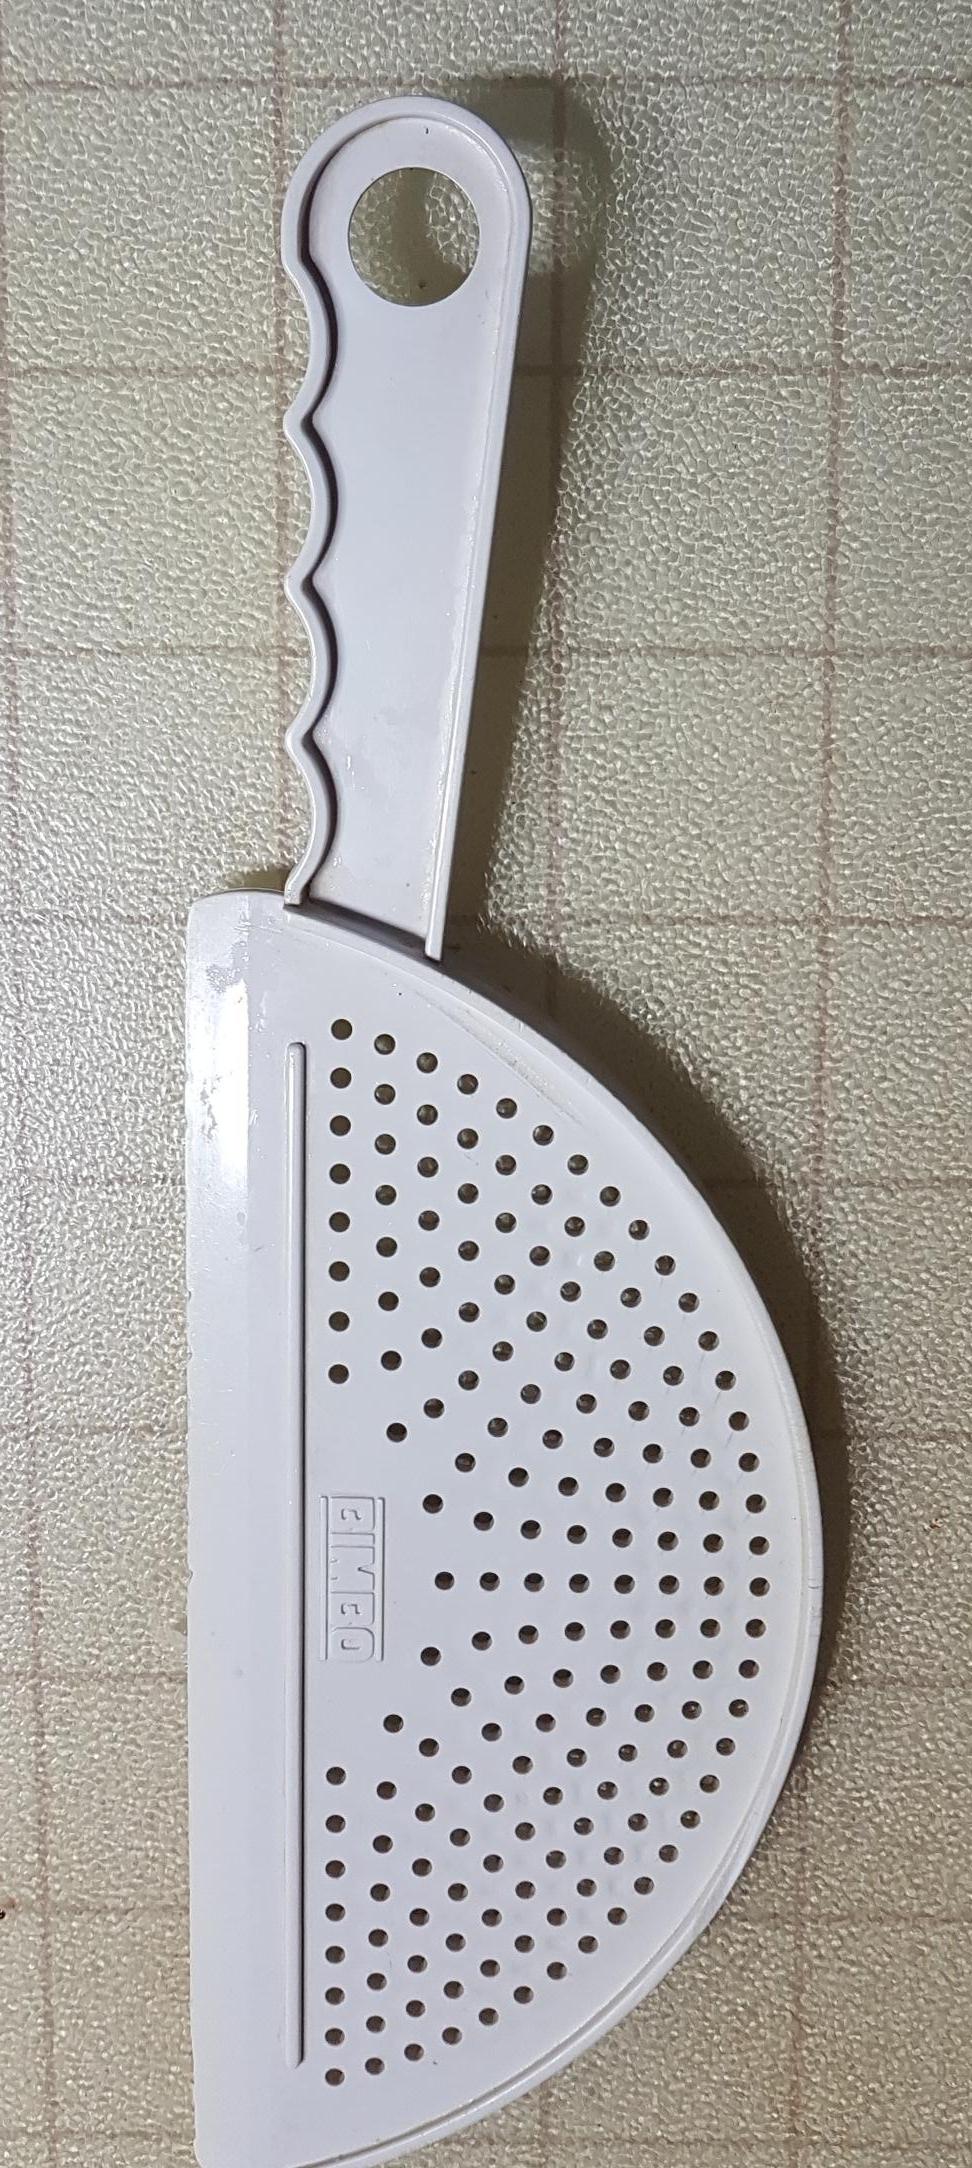 Box and Other Hand-held Graters - Page 2 - Kitchen Consumer - eGullet Forums